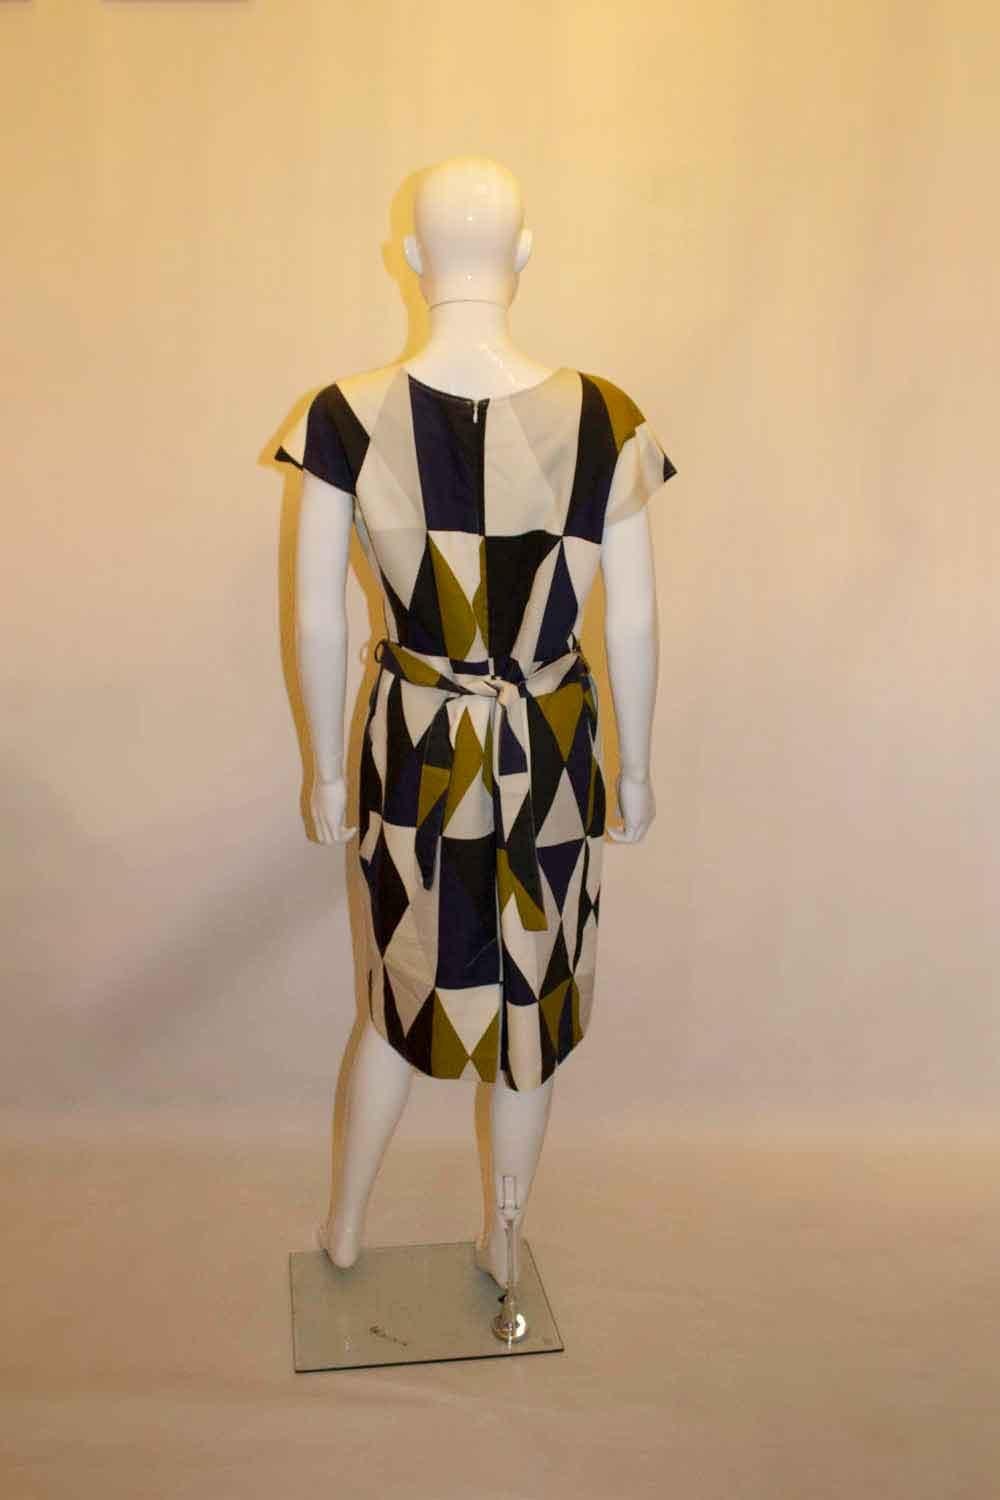 A headturning outfit by Finnish designer Marimekko. In a wonderful brown , black and white print, the jacket is size 38 and measures Bust up to 40'', length 18''. The dress has a self fabric belt, 2 pockets at the front and a zip opening at the back